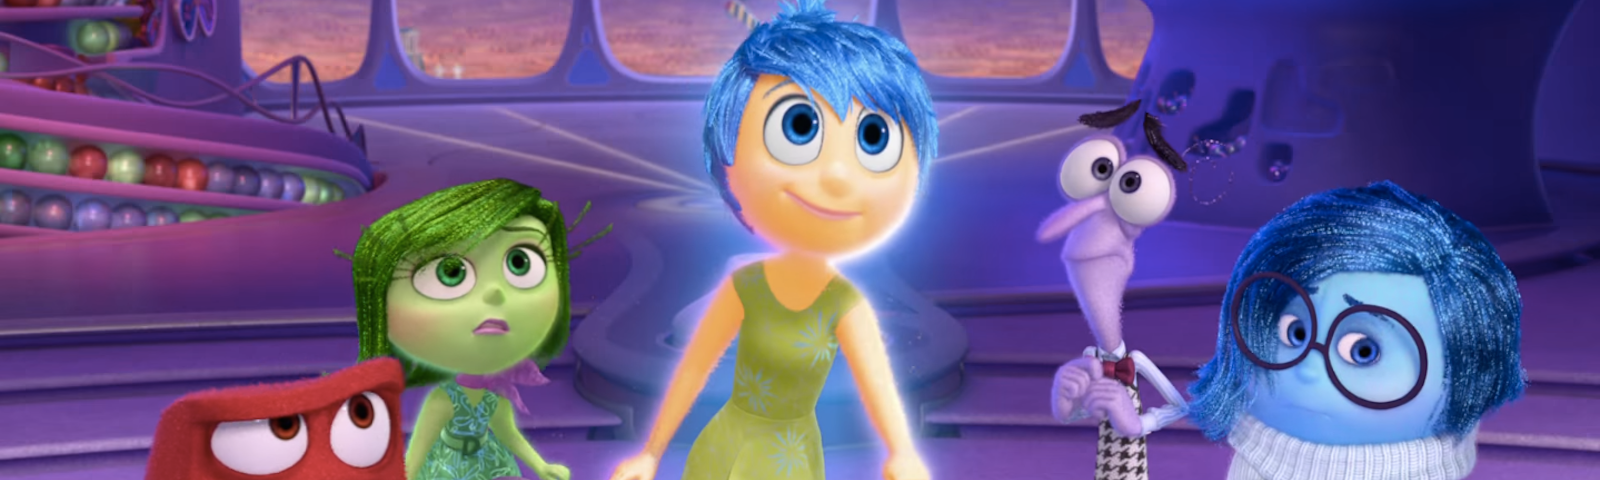 The characters, Anger, Disgust, Joy, Fear and Sadness from the Disney Pixar Movie “Inside Out”